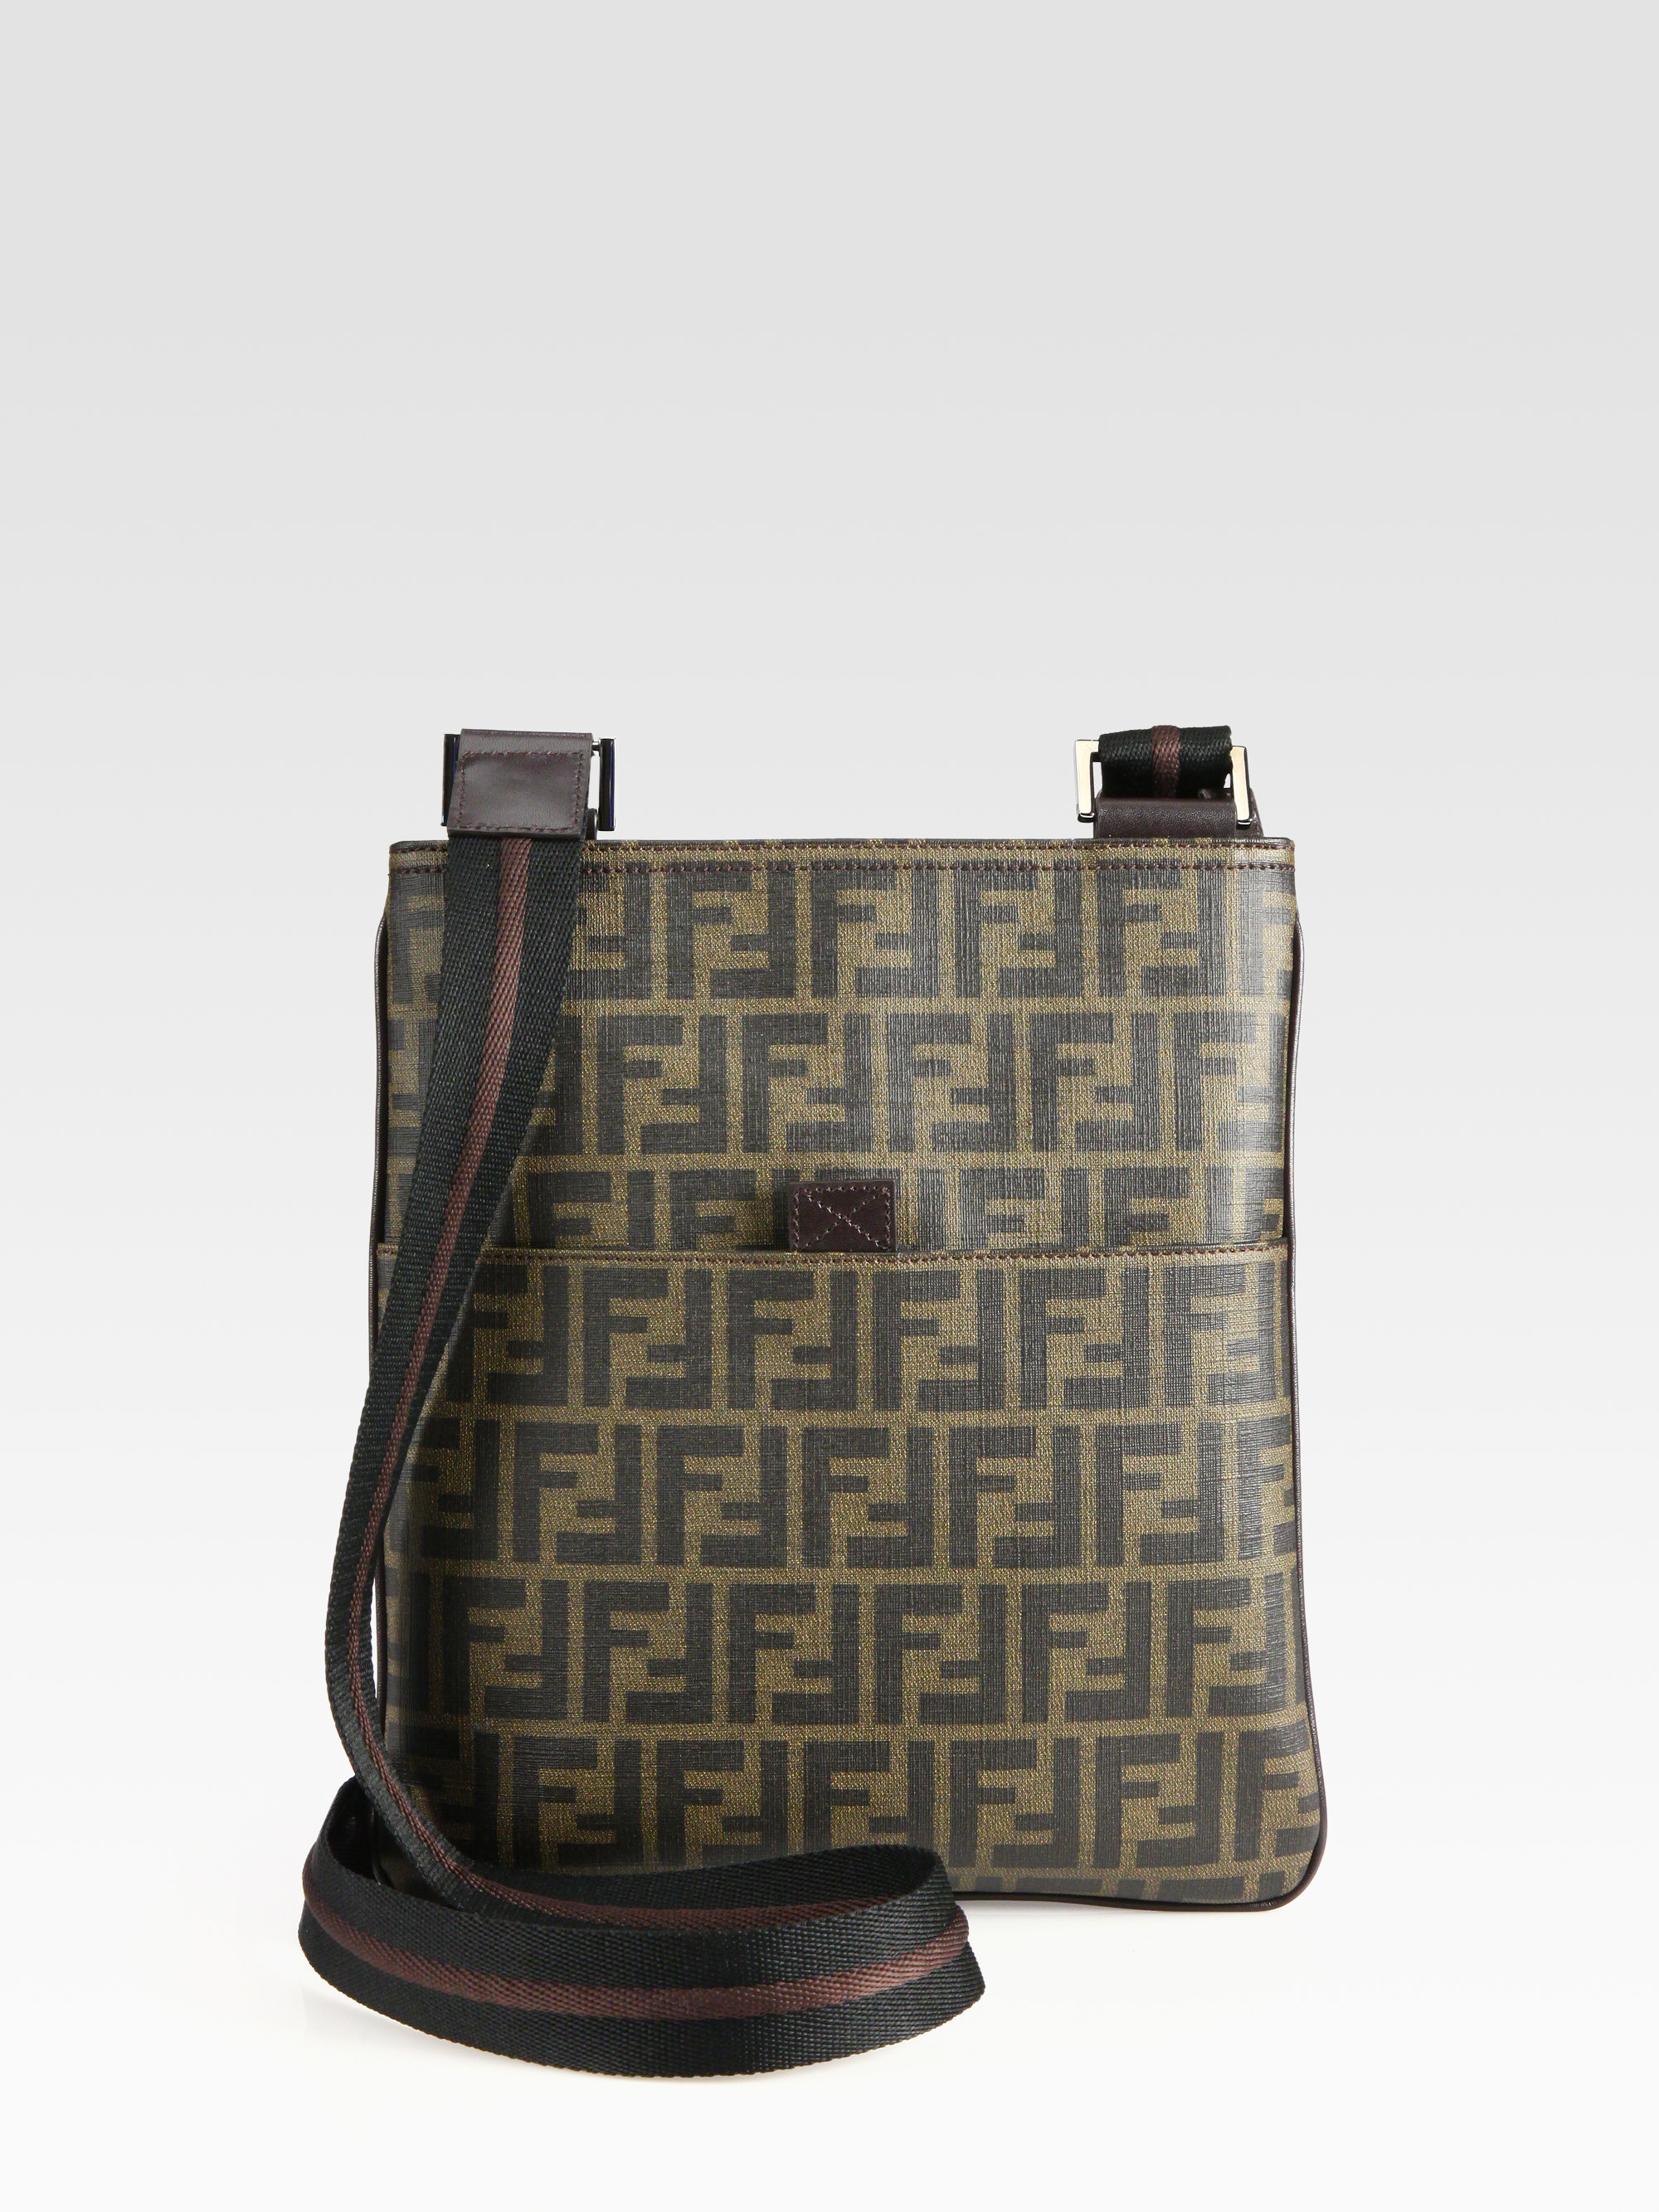 Fendi Zucca Small Messenger Bag in Tobacco (Brown) for Men - Lyst